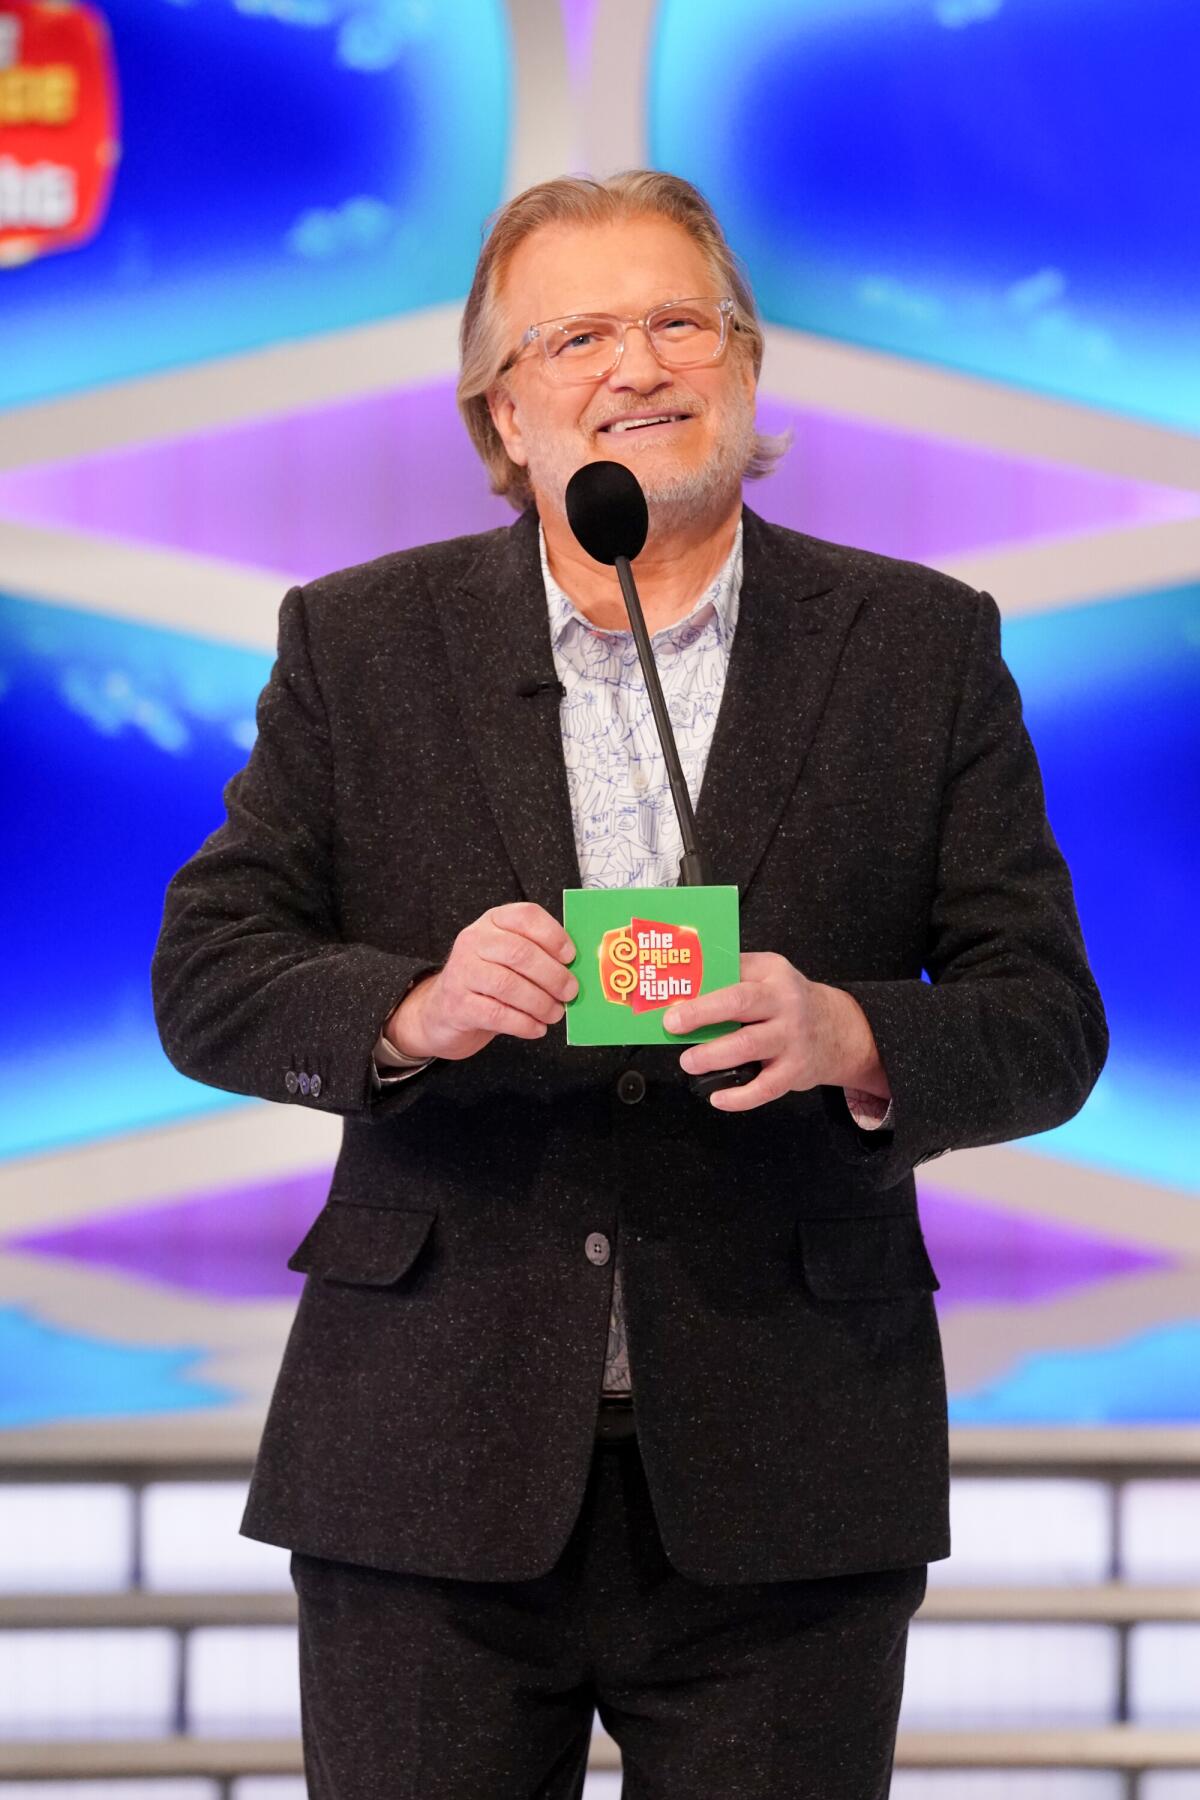 Drew Carey wears a black suit and smiles in front of a microphone while holding a green cue card.